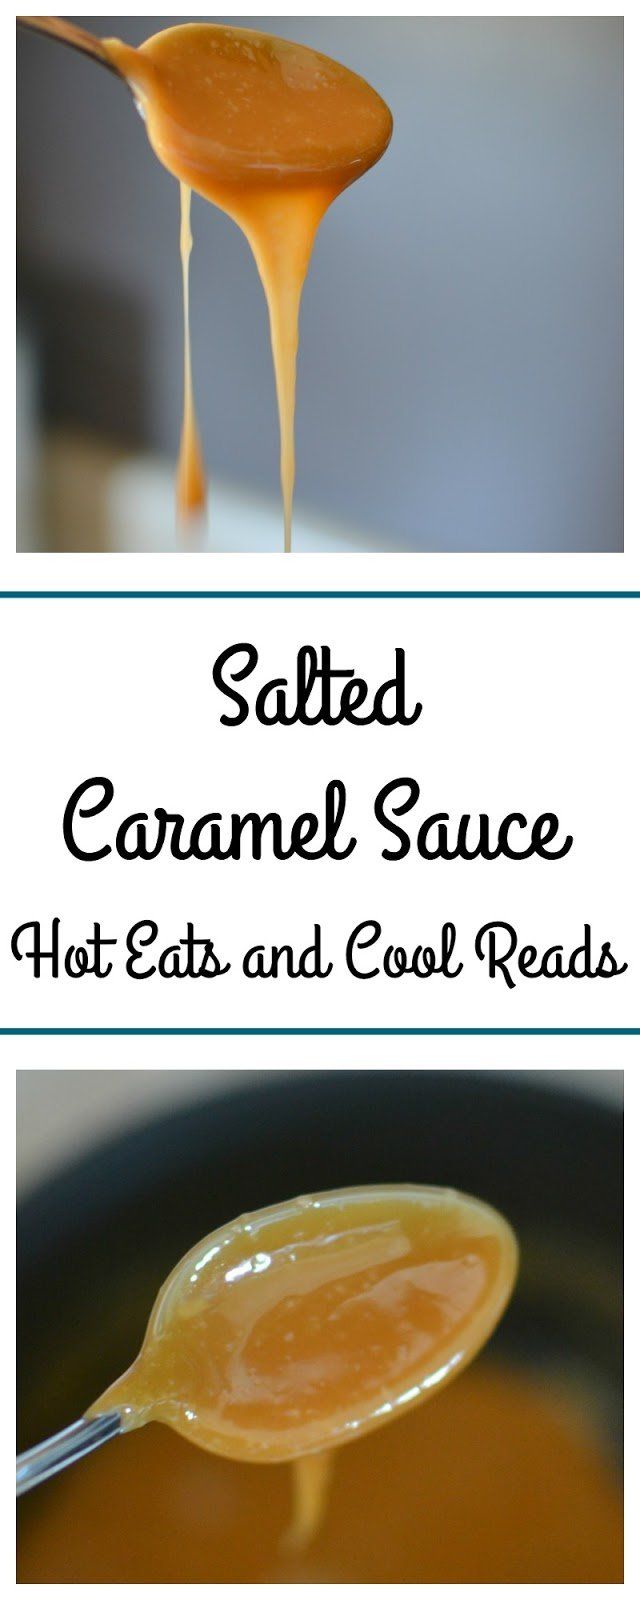 best of Sauce hot making lick great recipe Cooking hot